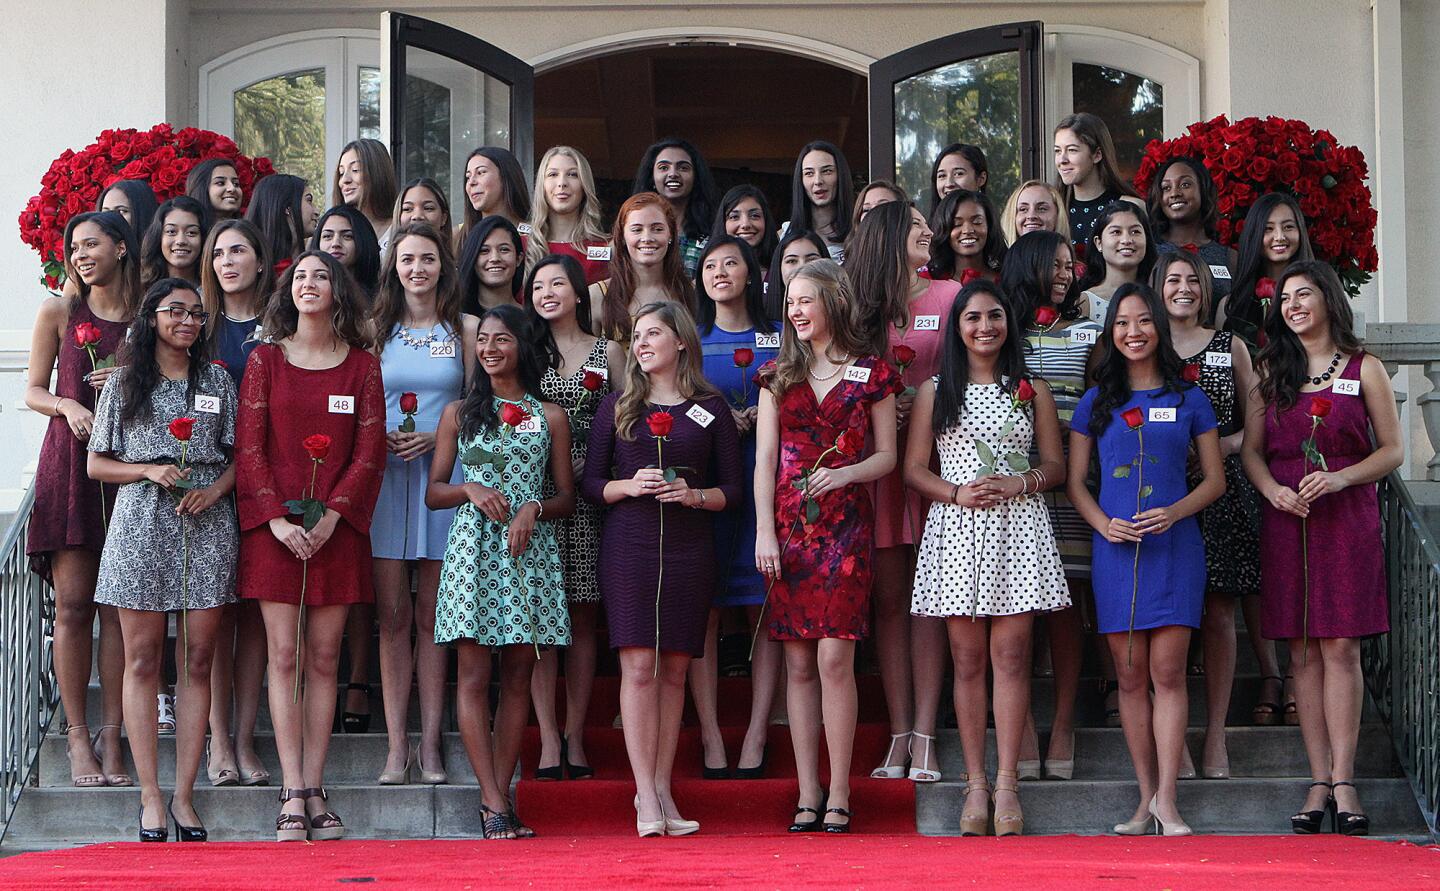 All 39 finalists nervously stand together after being announced to the crowd at the announcement of the 2016 Tournament of Roses Royal Court at the Tournament House in Pasadena on Monday, Oct. 5, 2015.